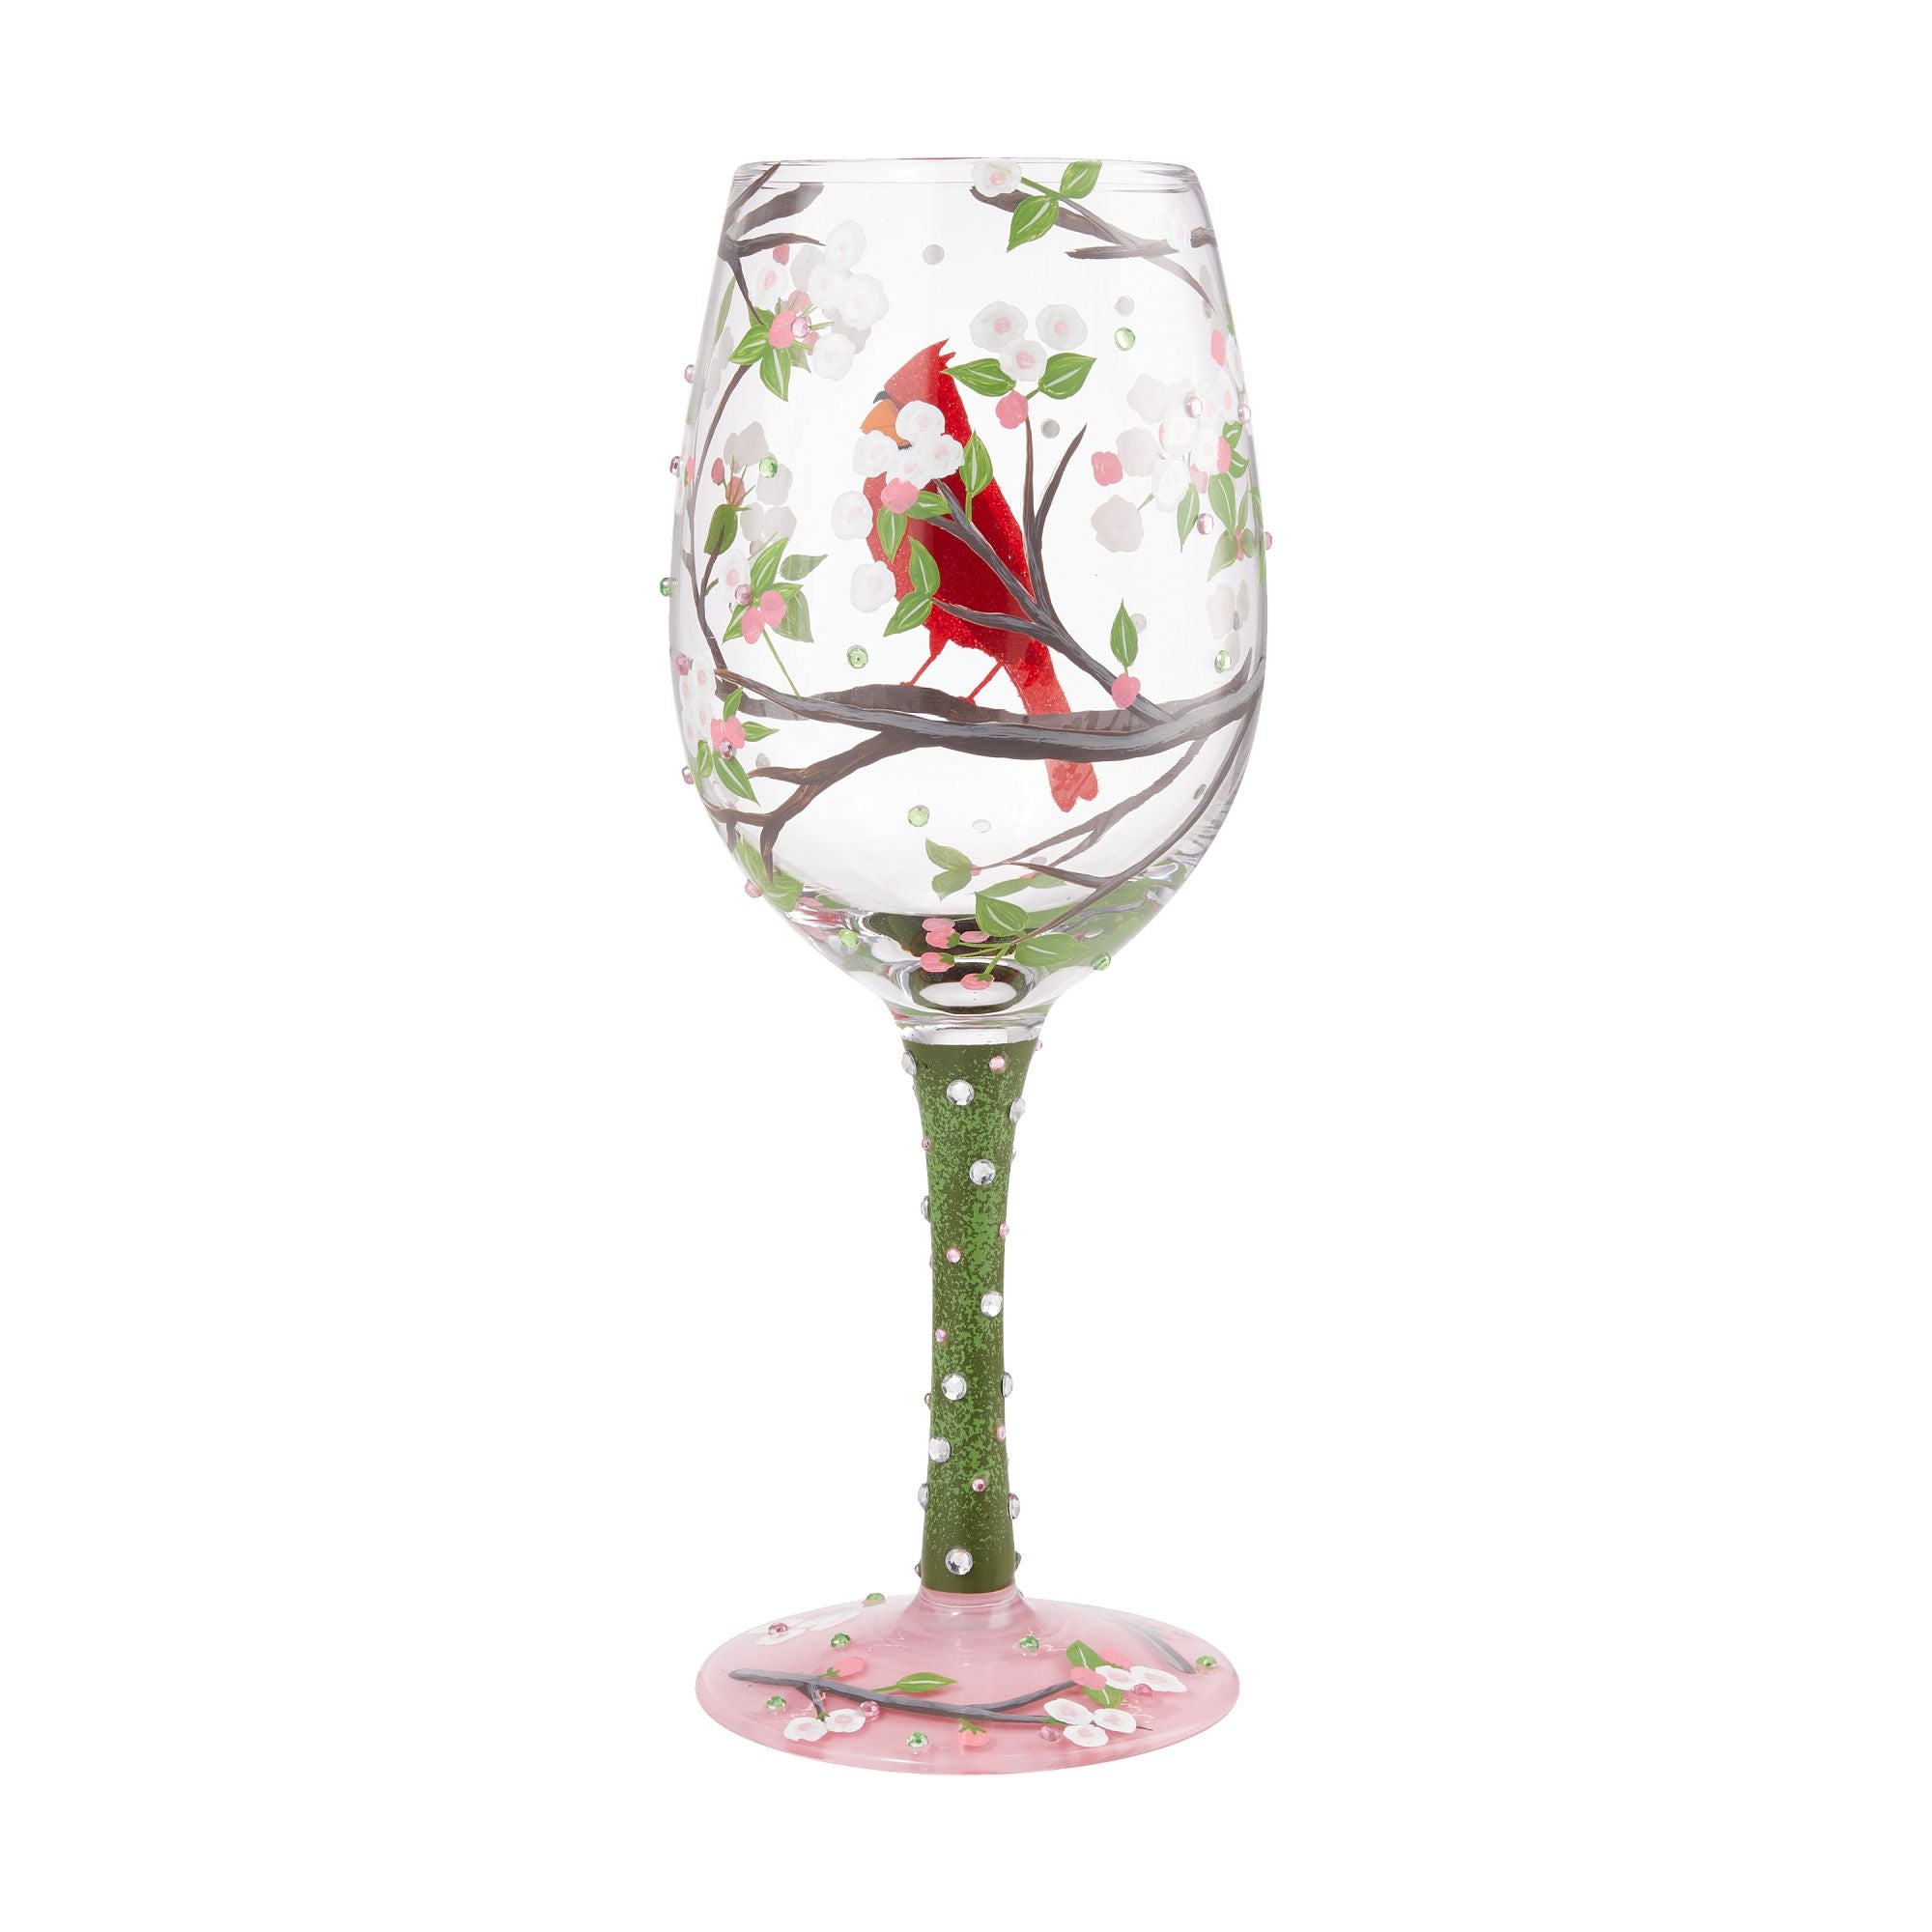 Stained Glass Abstract Hand Painted Wine Glasses in Stemmed 